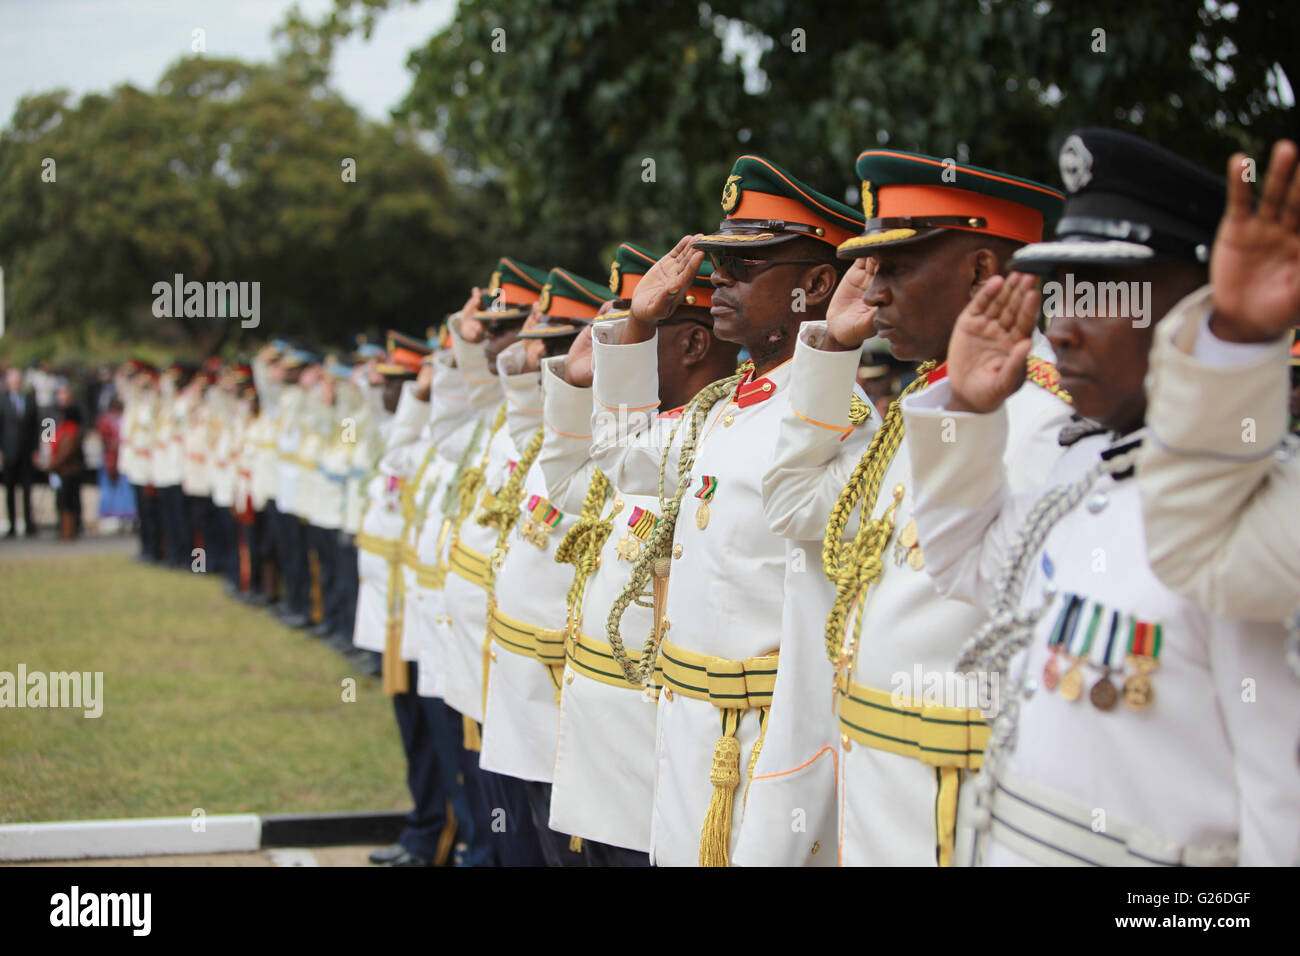 Lusaka, Zambia. 25th May, 2016. Officers and soldiers salute at the Freedom Statue during a wreath-laying ceremony in honor of fallen freedom fighters in Lusaka, capital of Zambia, May 25, 2016. Zambia commemorated the Africa Freedom Day in colorful celebrations. © Peng Lijun/Xinhua/Alamy Live News Stock Photo